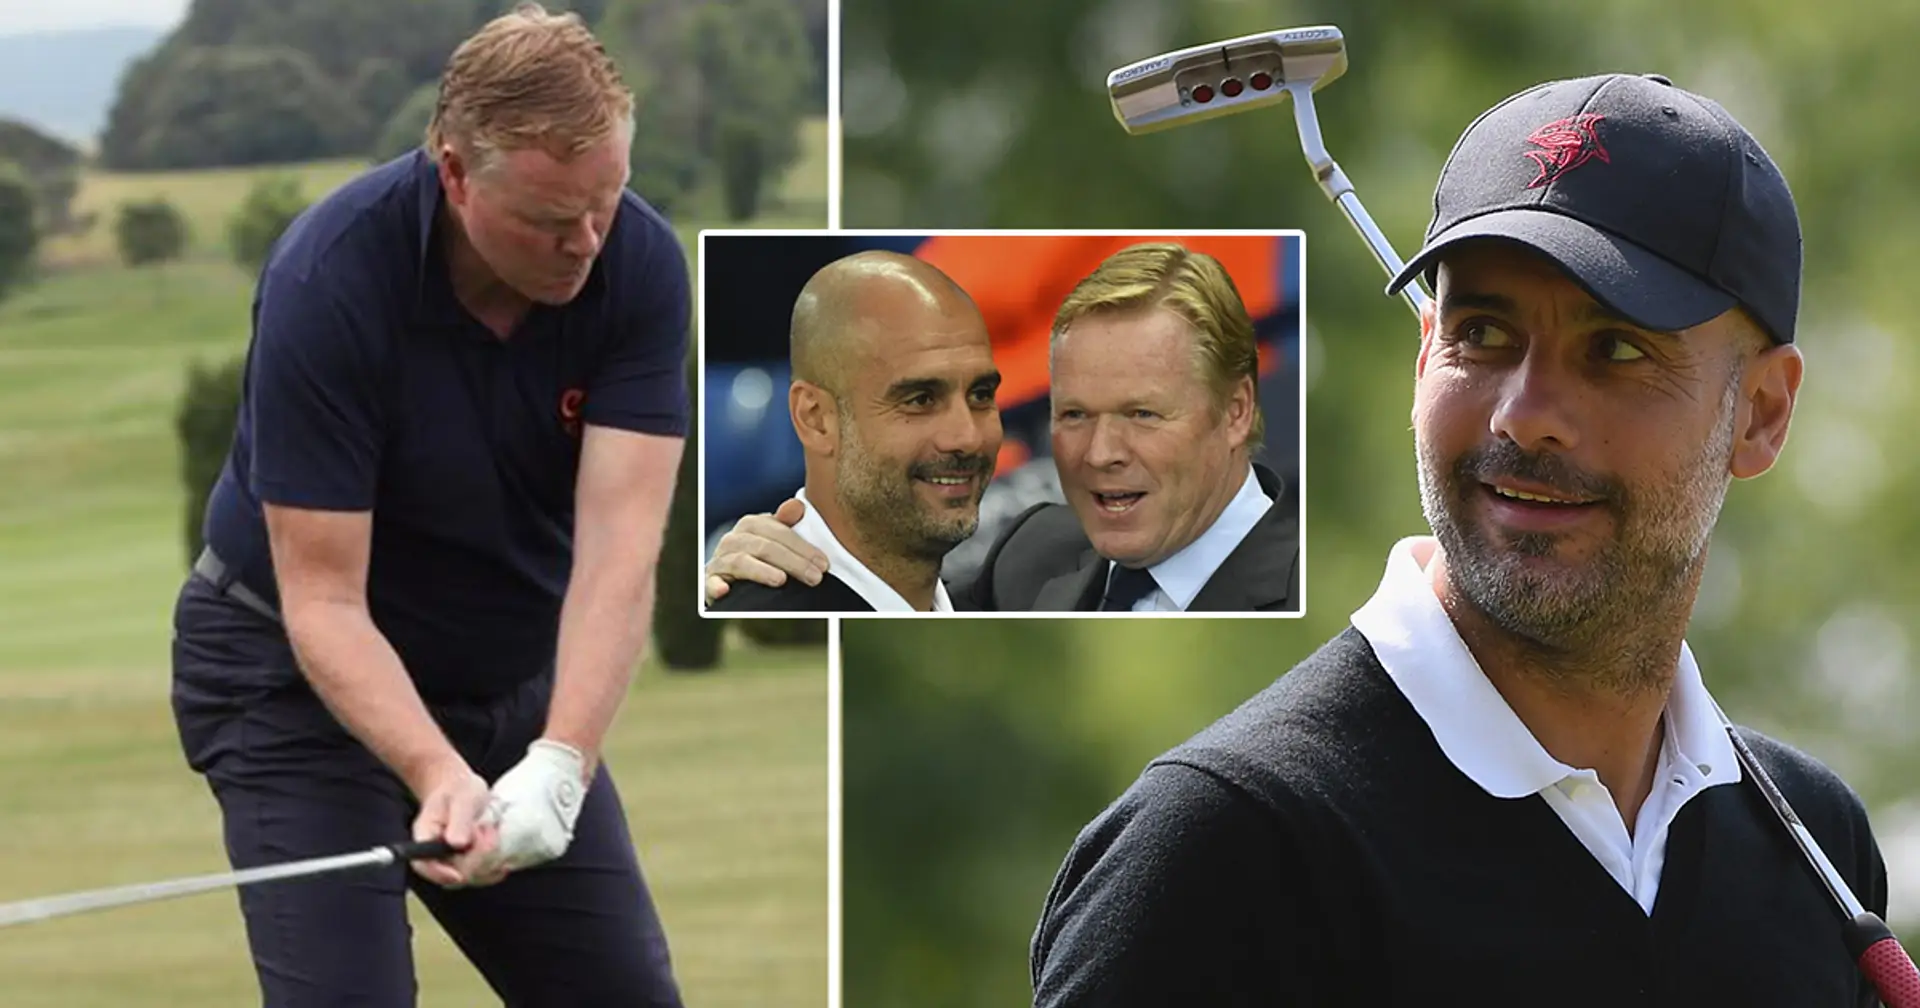 Koeman 'meets Guardiola near Barcelona' to play golf together, first pics unveiled